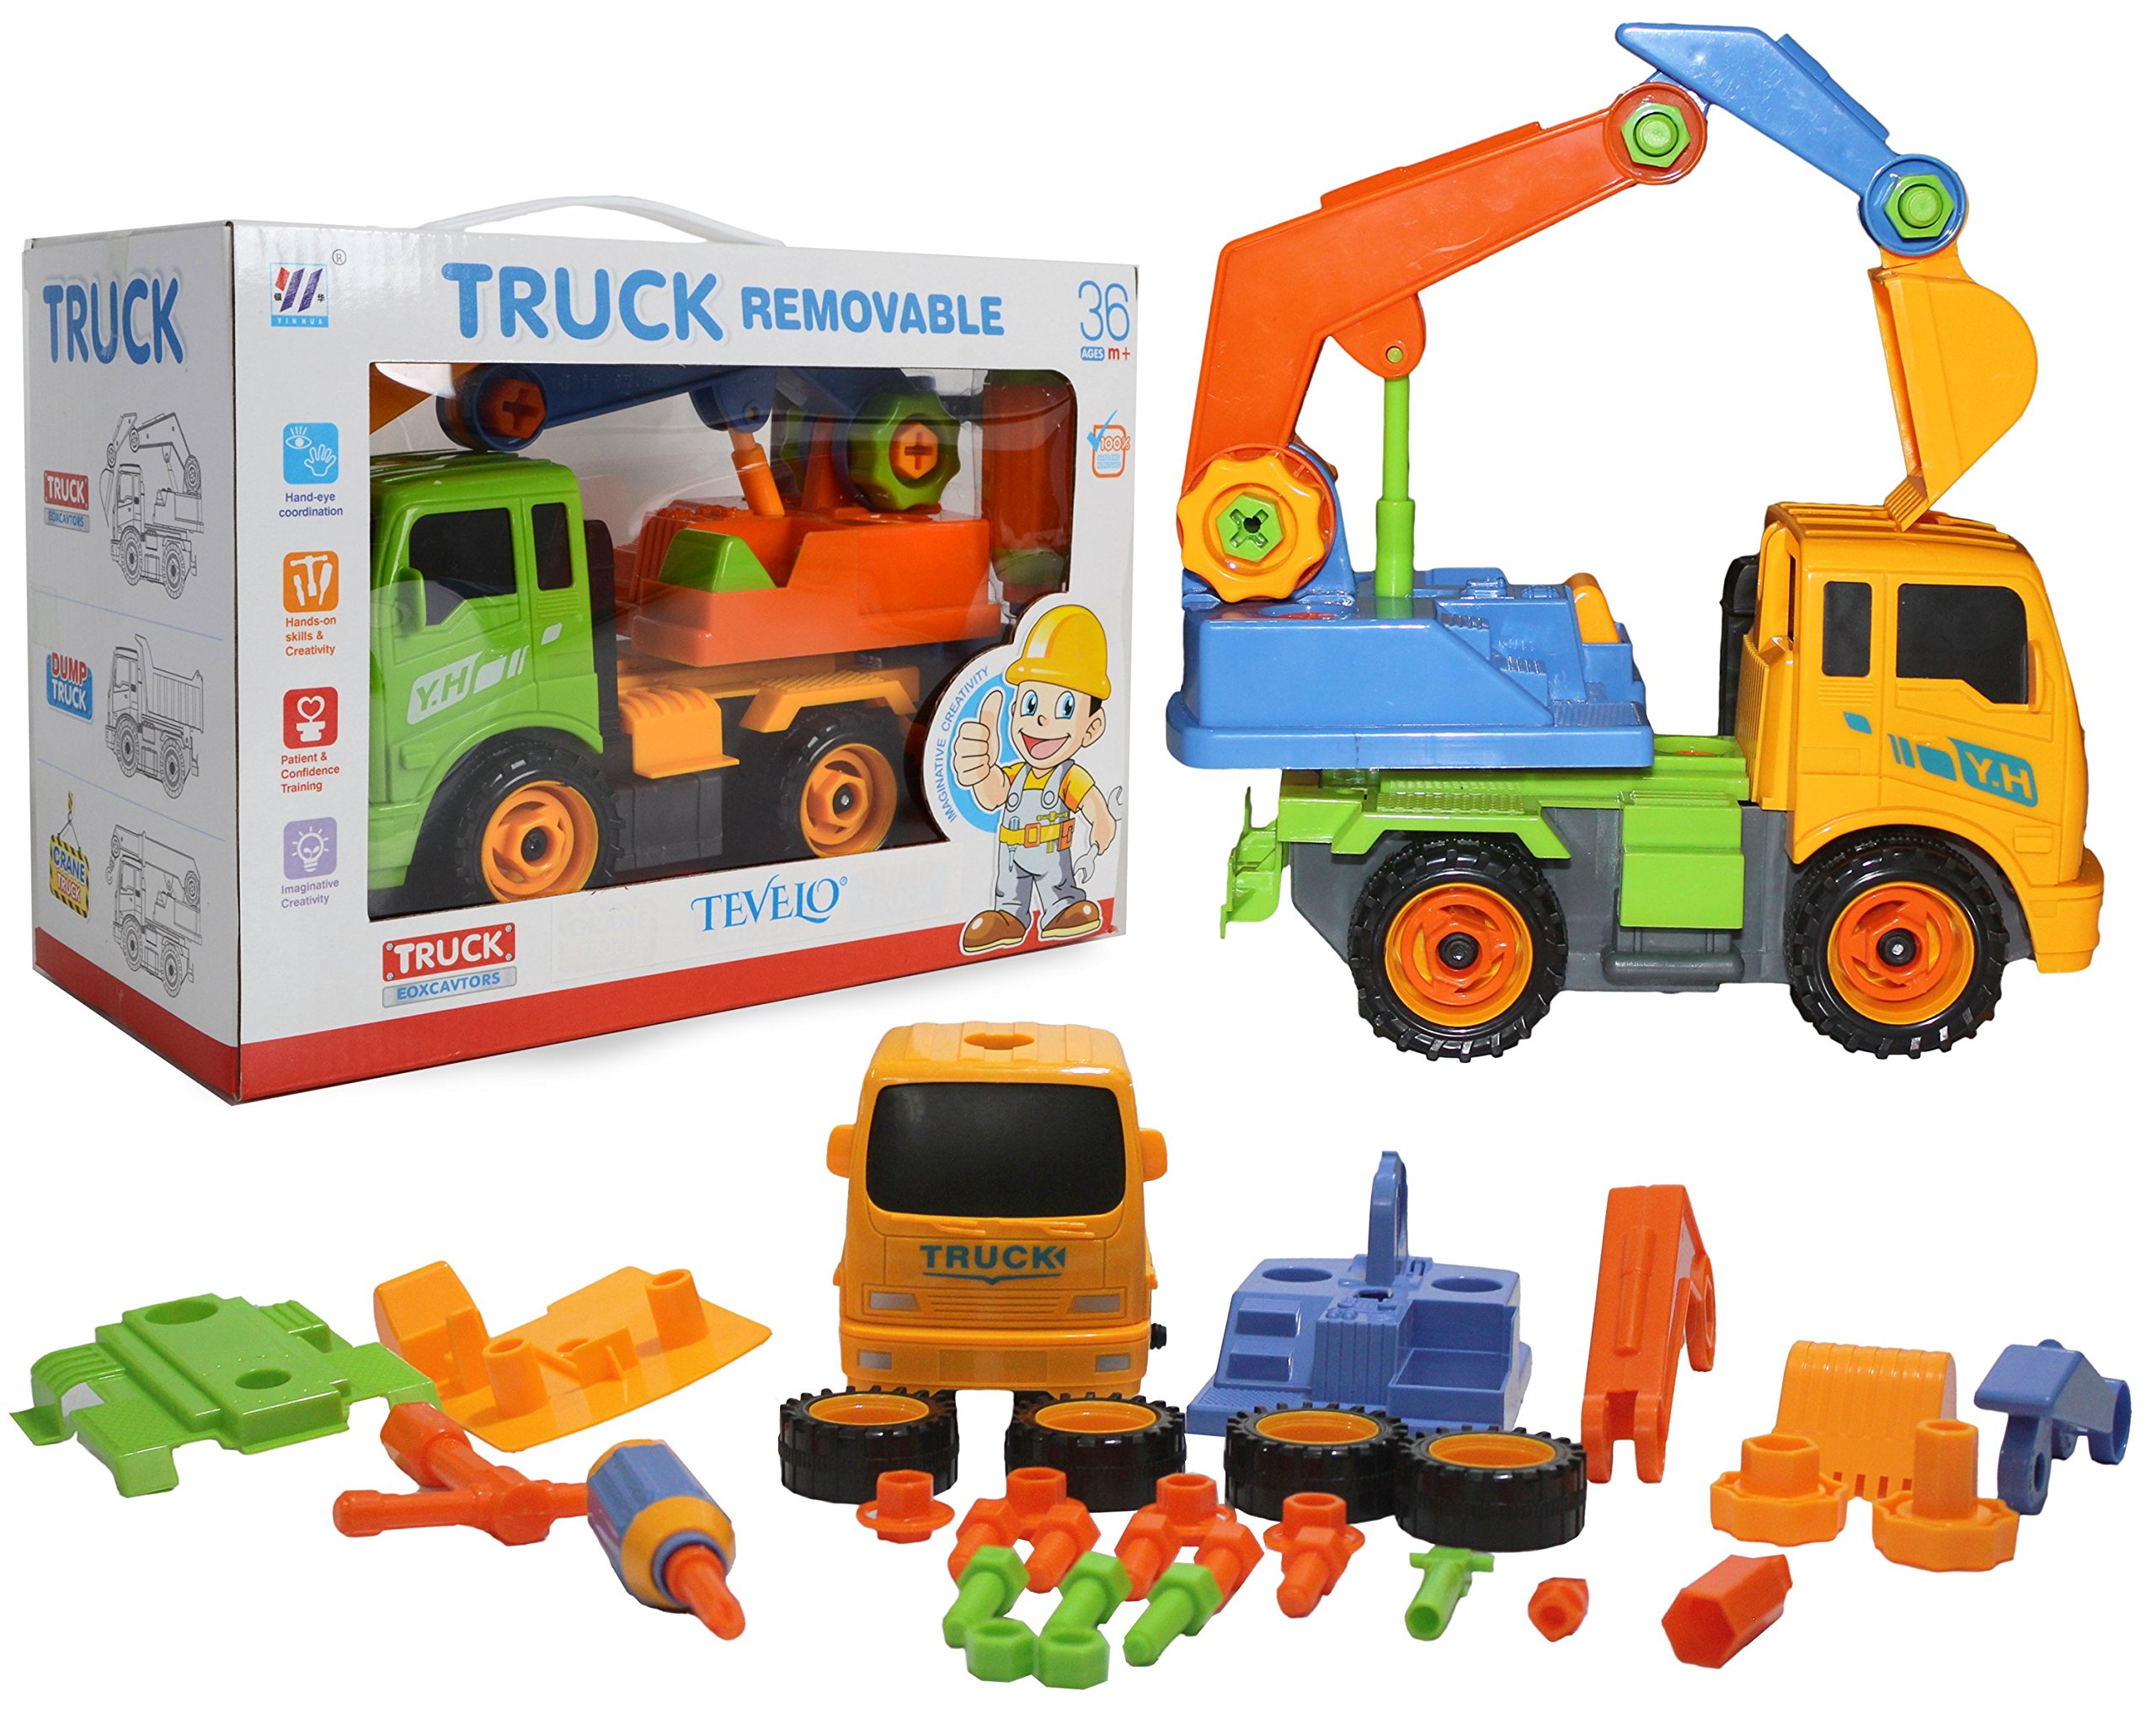 Construction truck toy photo